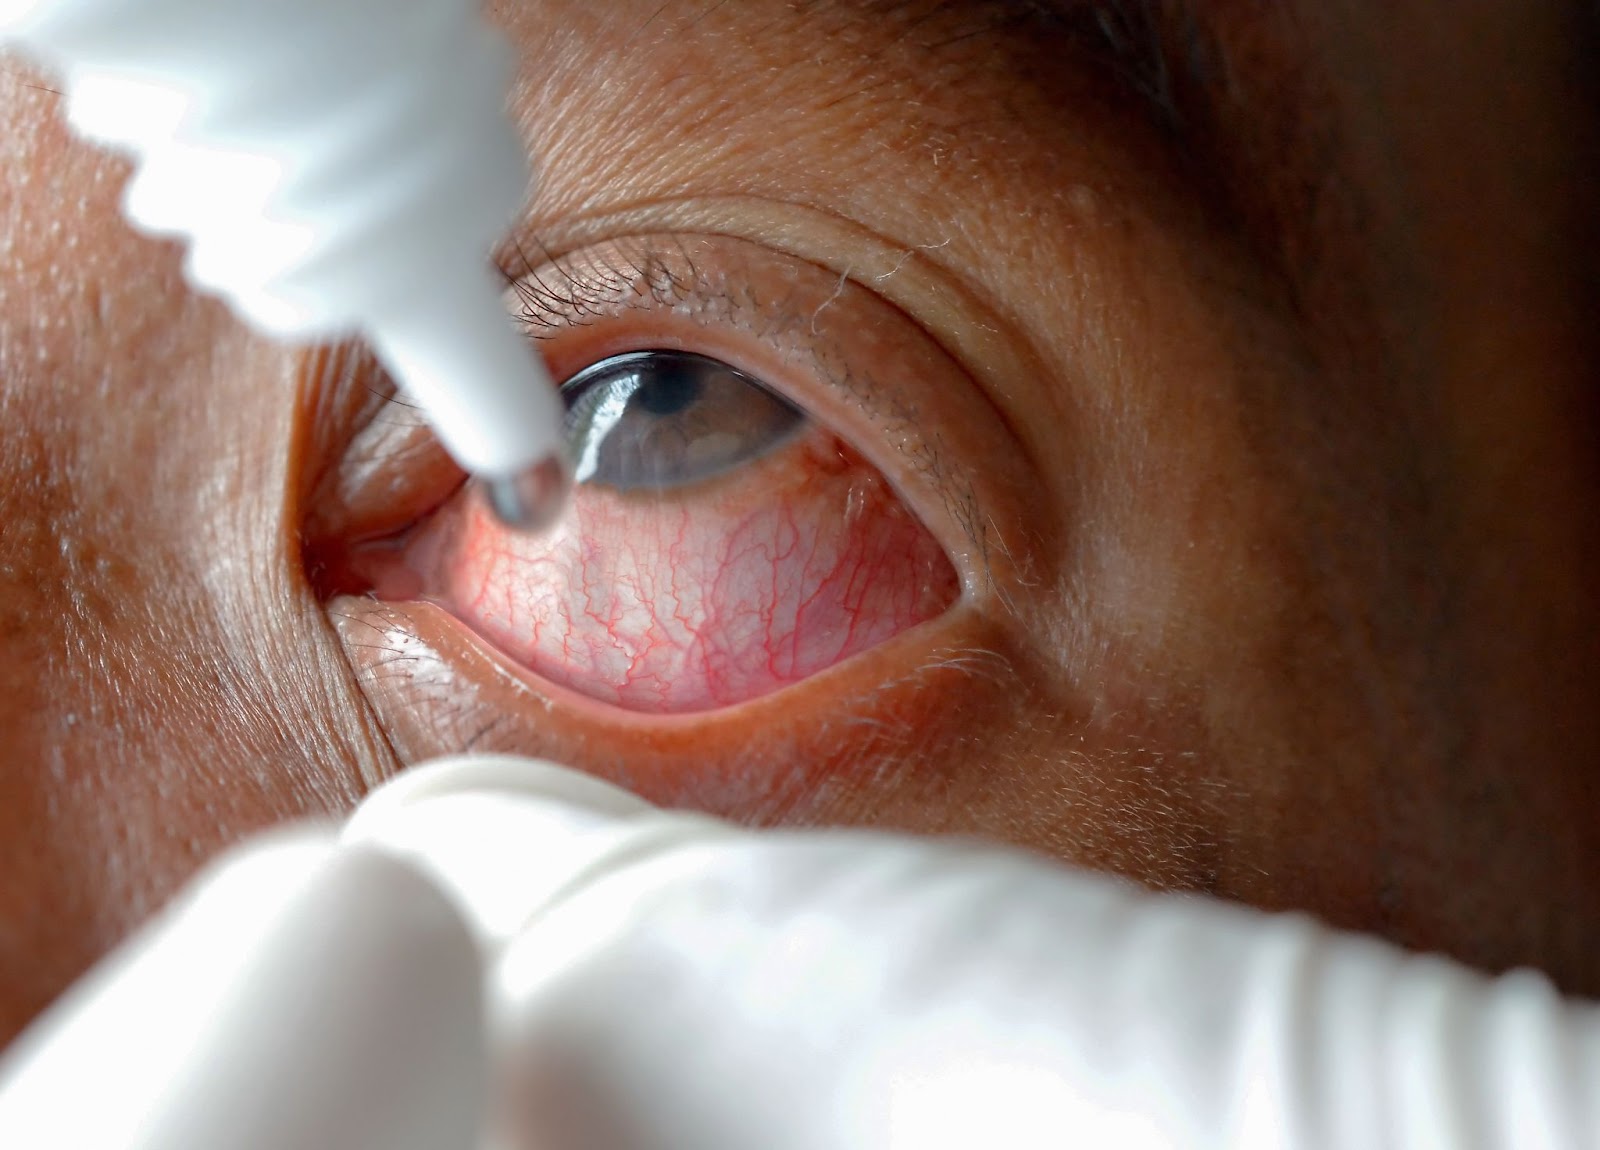 A close up shot of eye drops being put into an red, irritated-looking eye.
